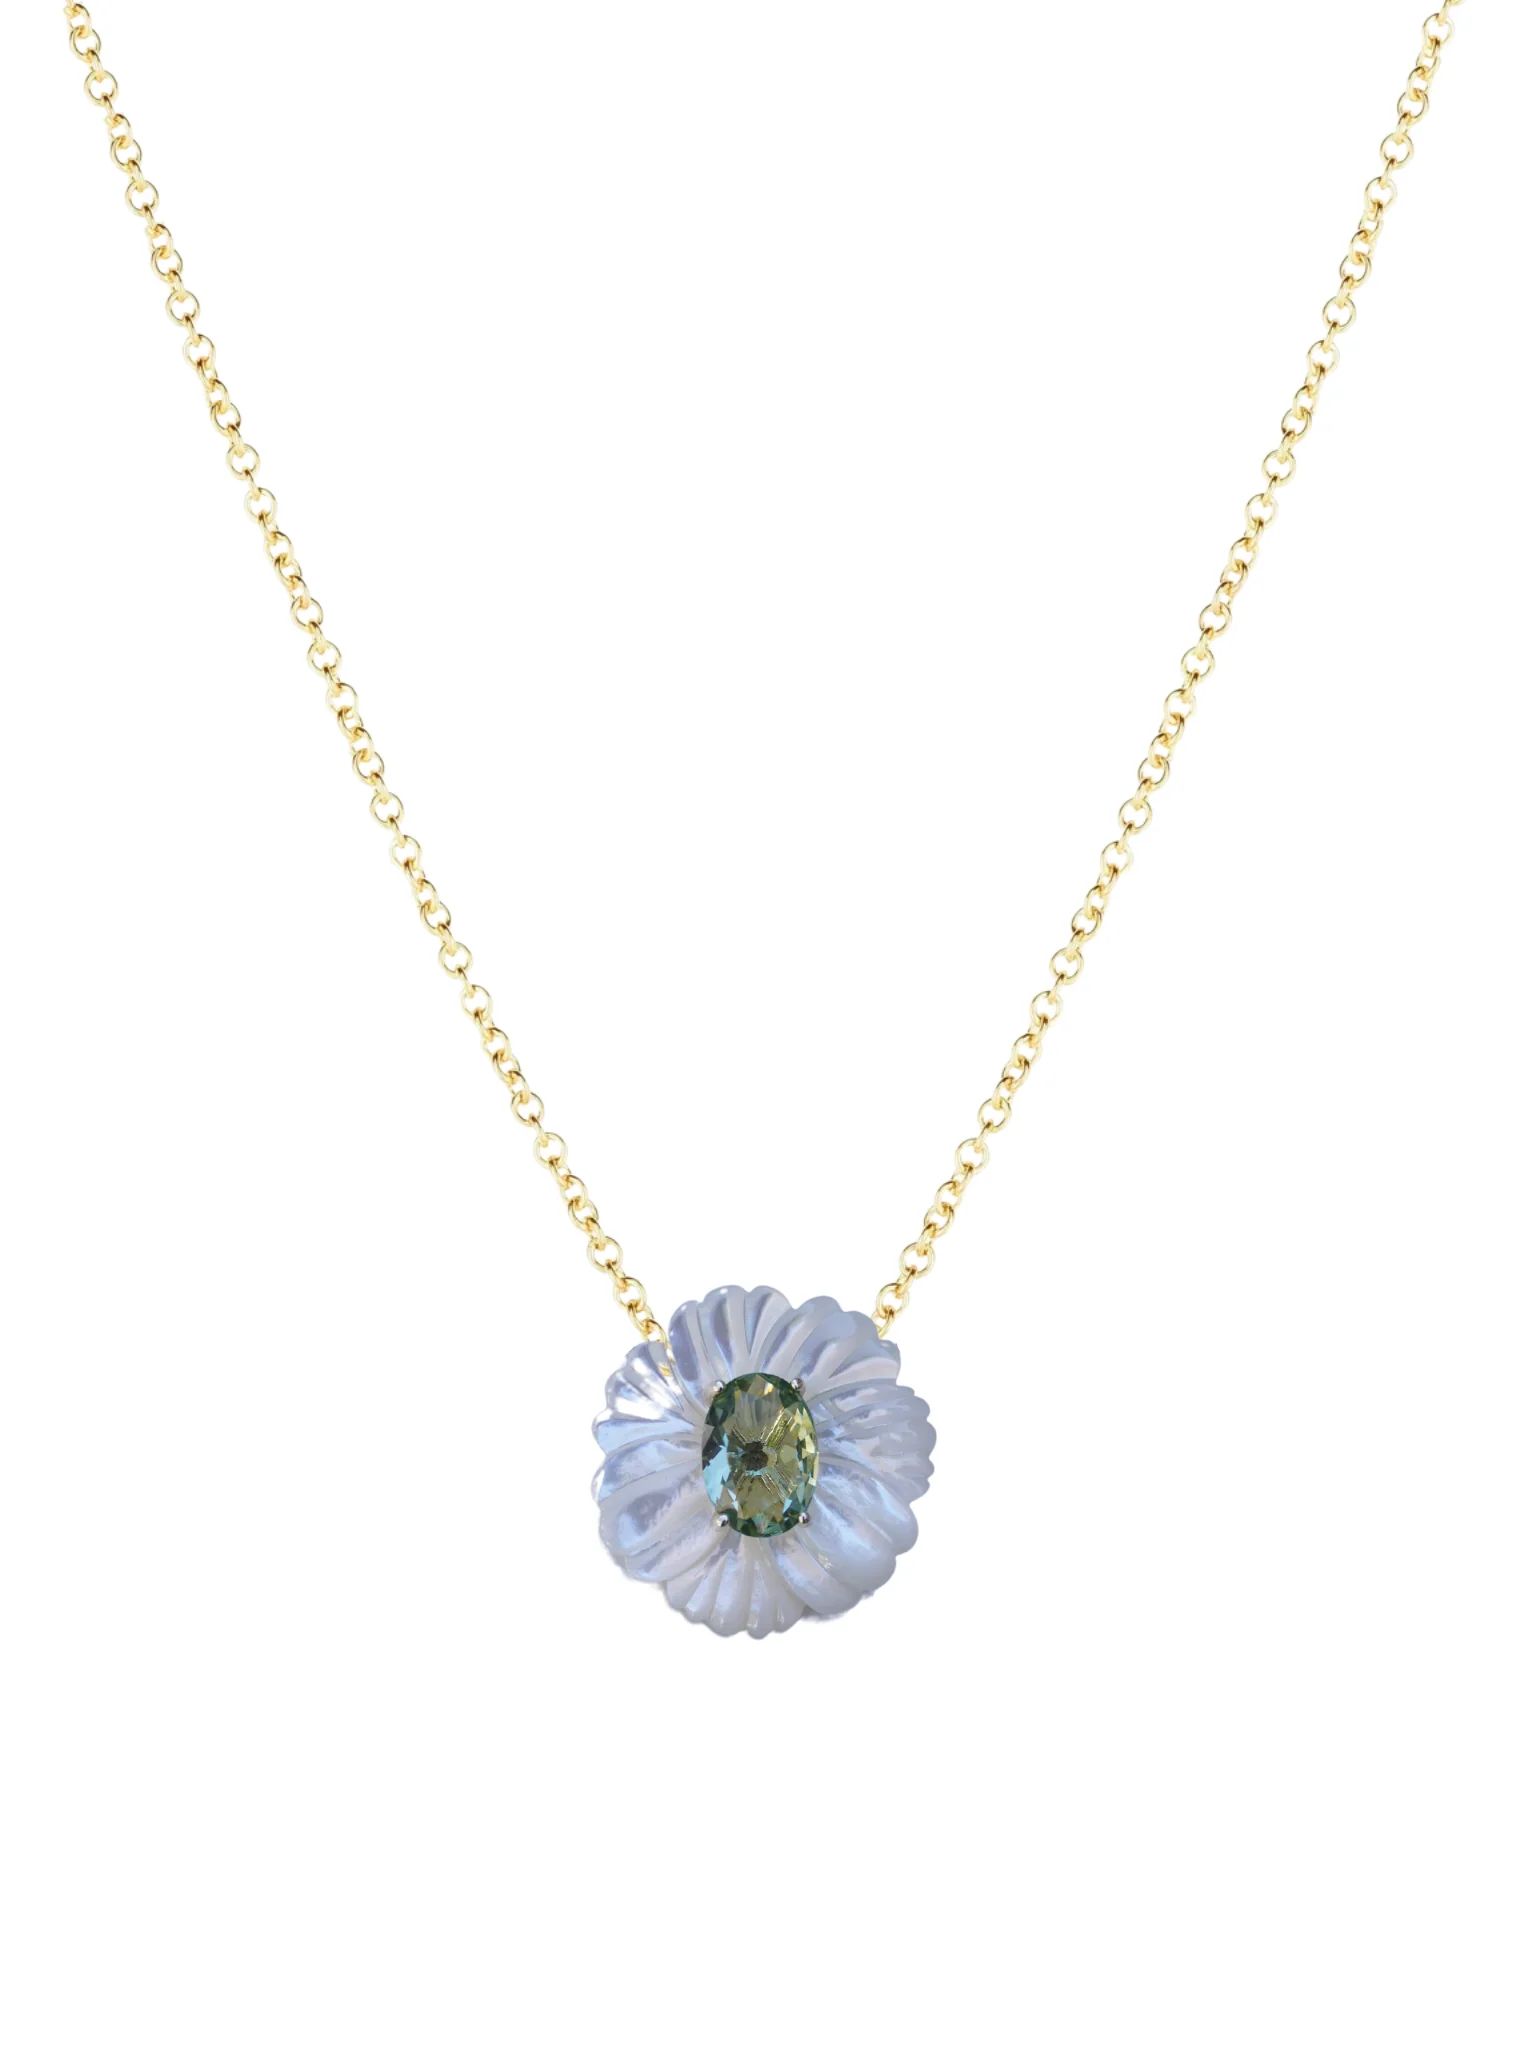 Mother of Pearl + Sage Necklace | Nicola Bathie Jewelry